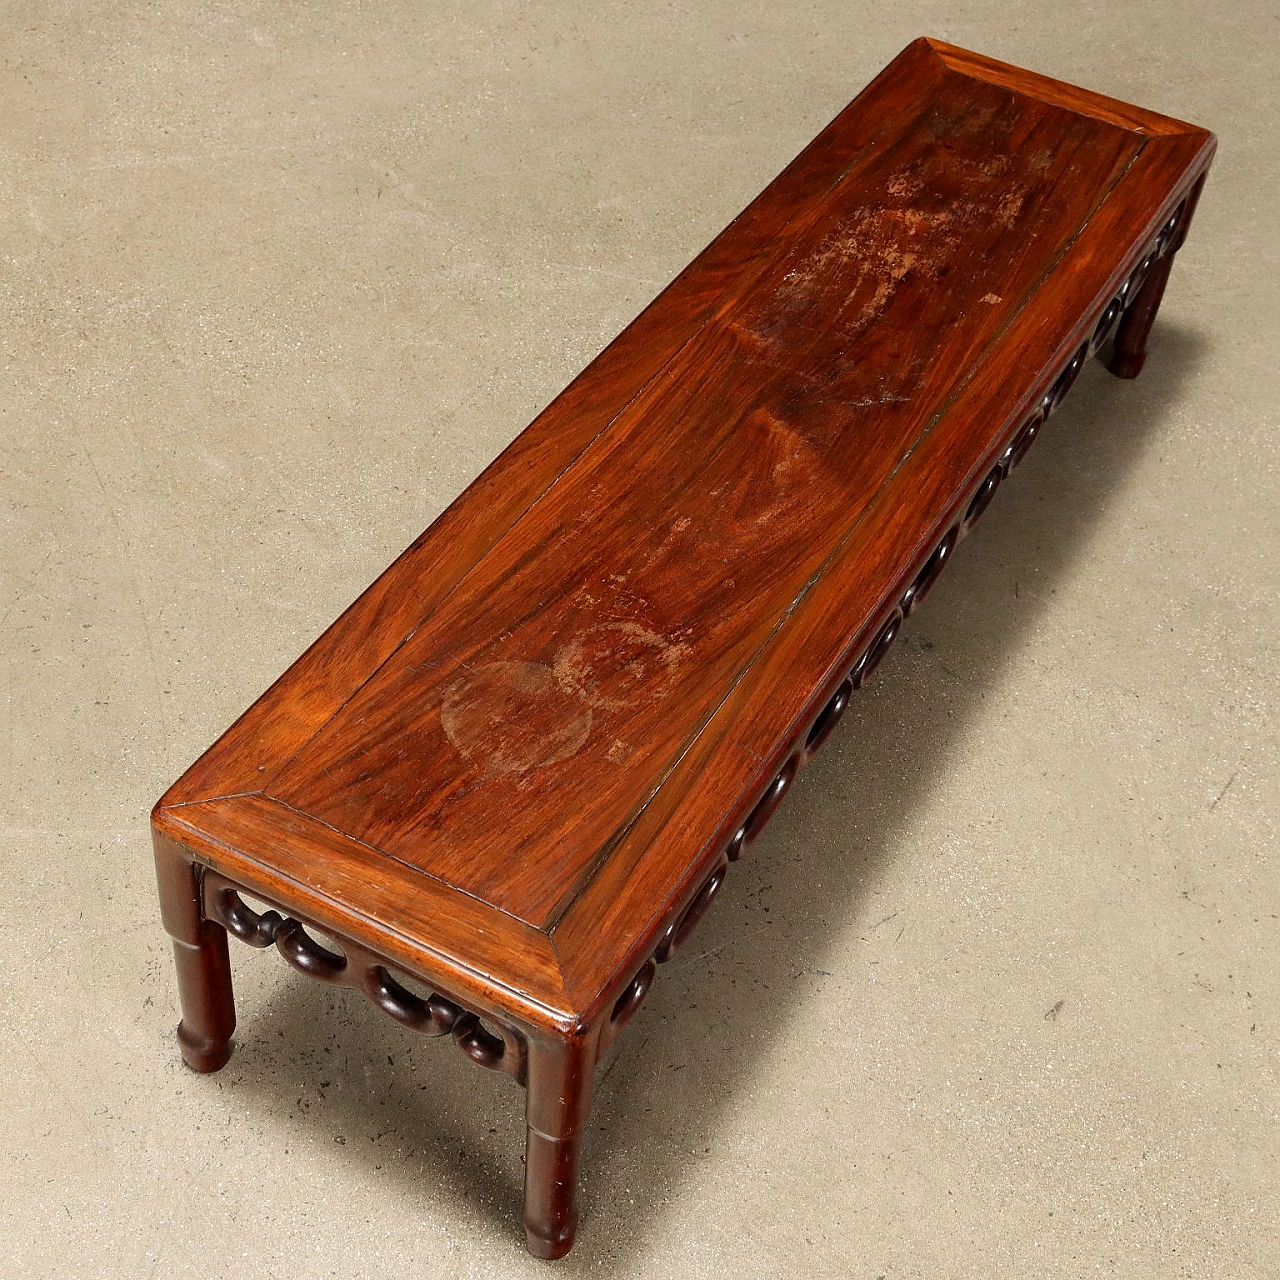 Carved and pierced wooden coffee table 3